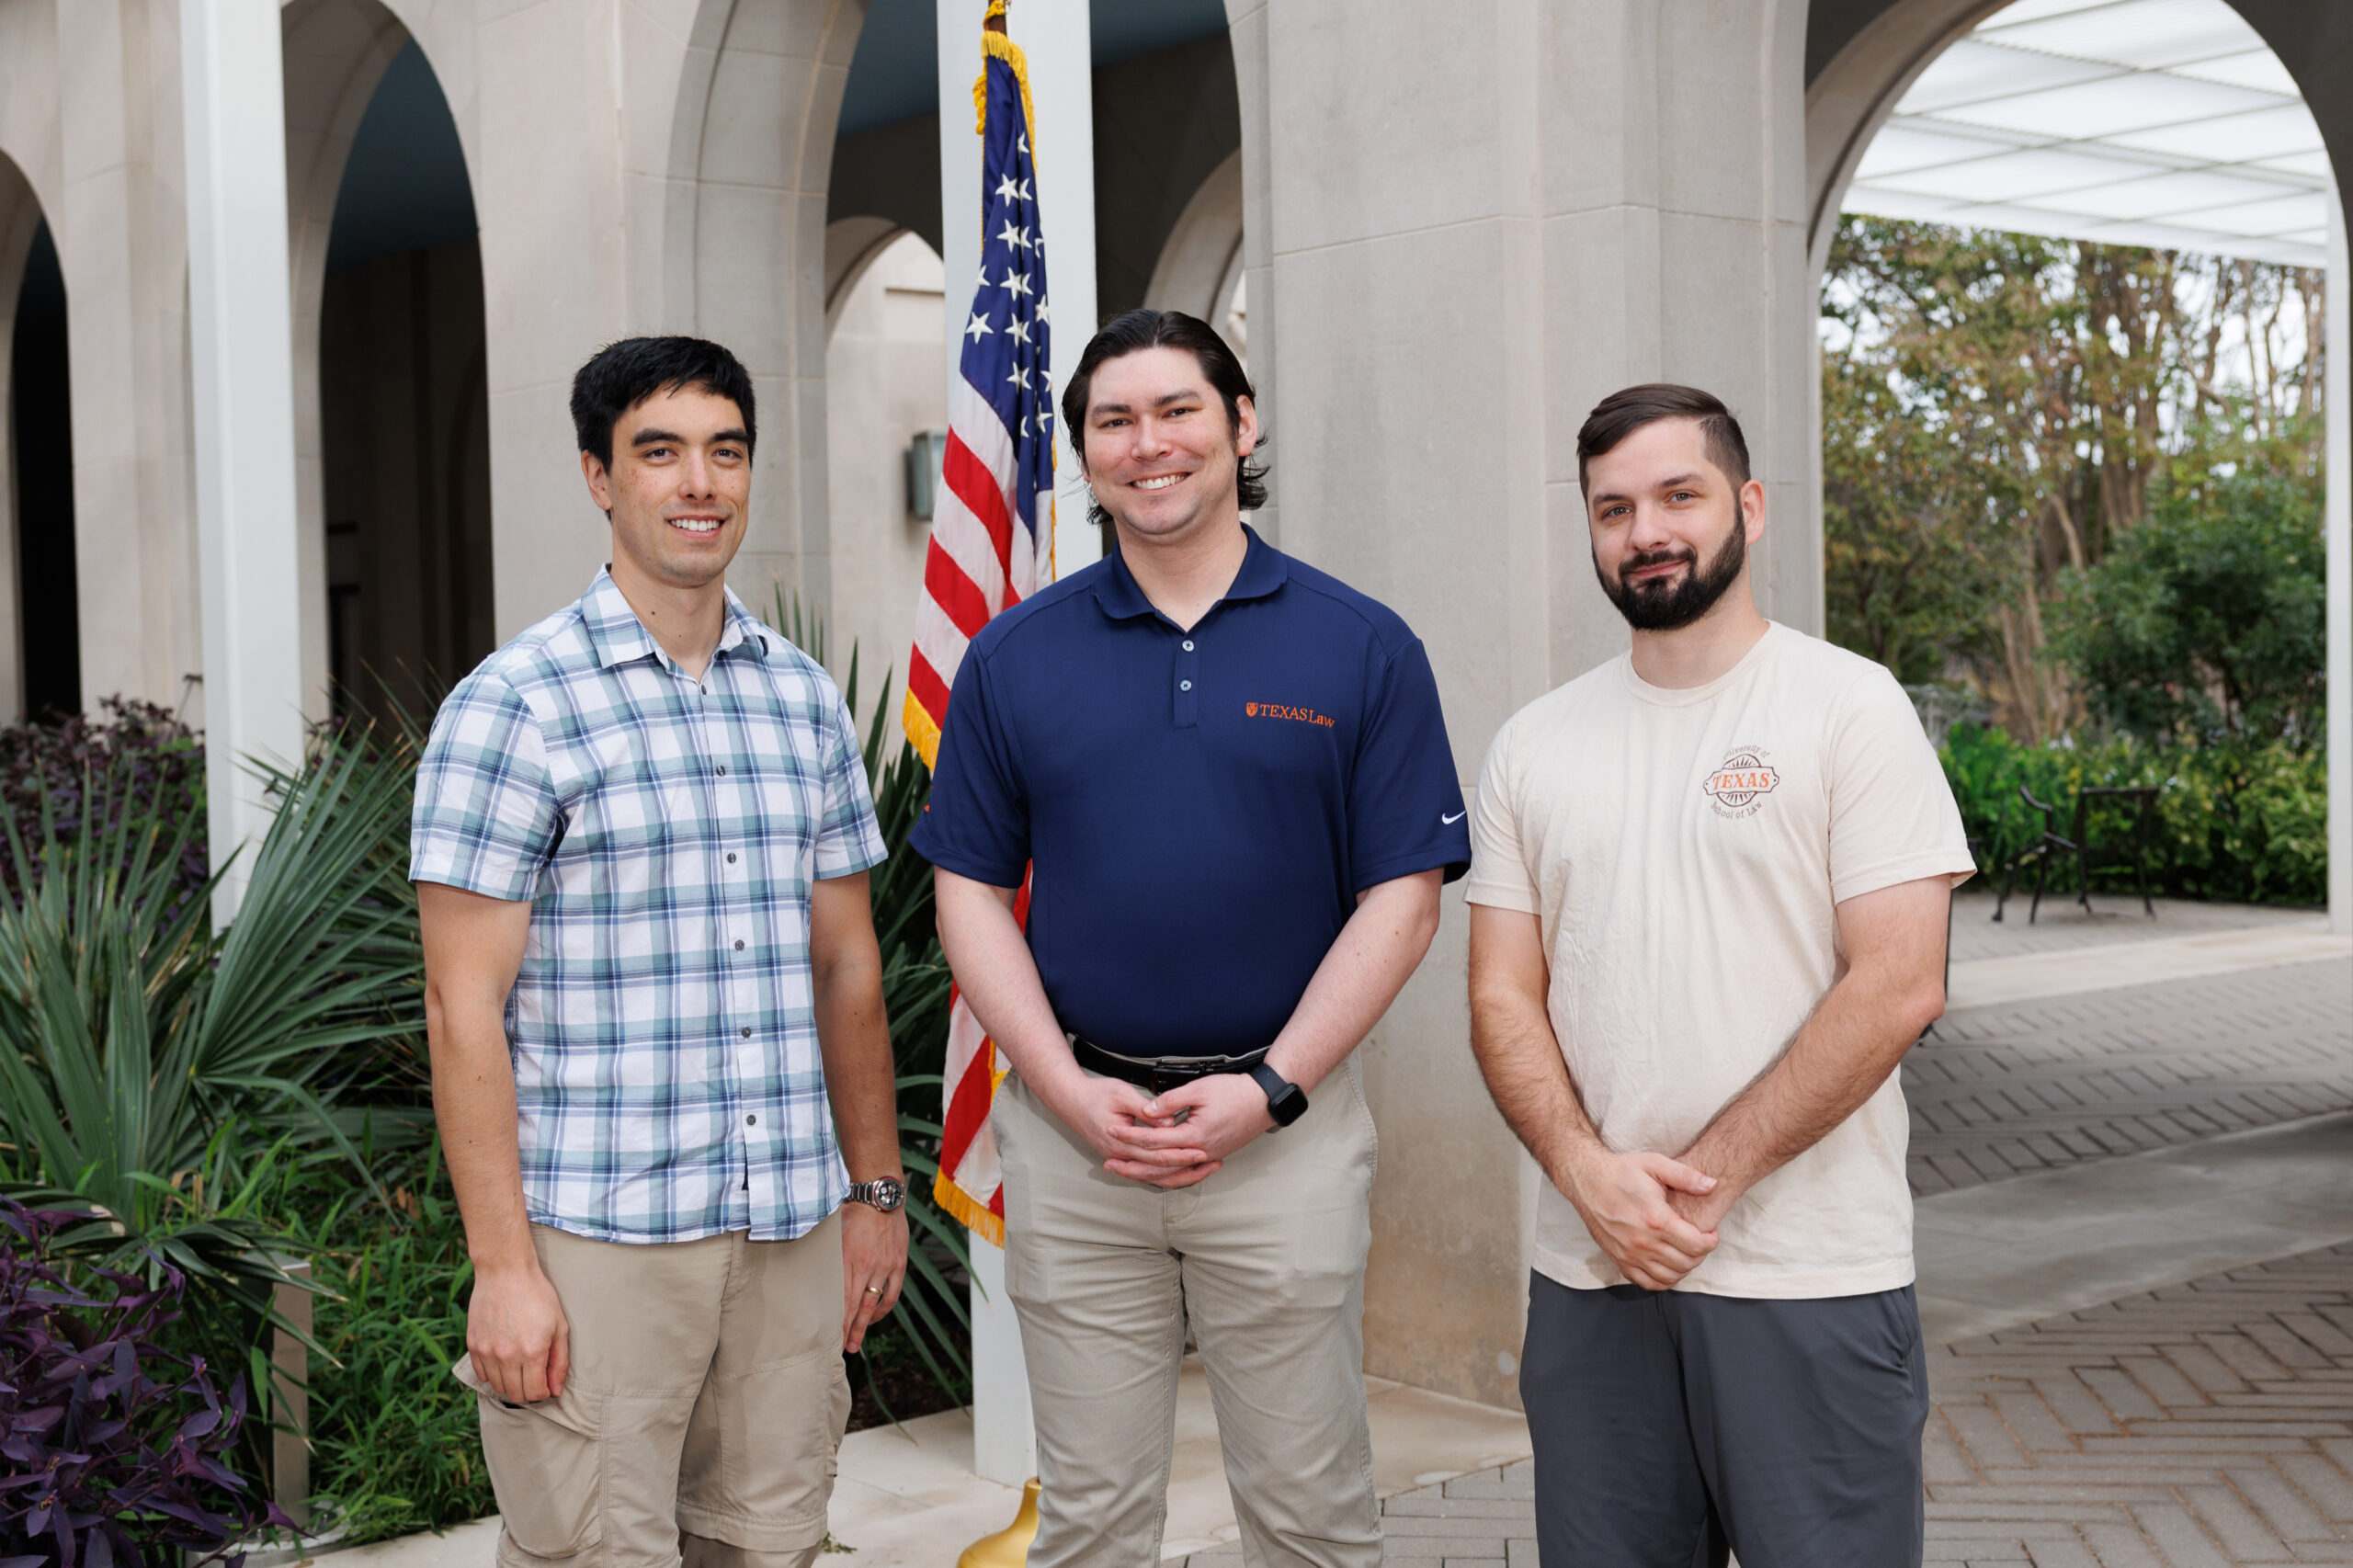 The TLVA leadership for the 2023-24 academic year, Social Coordinator Stephen See '24, President Thomas Rielly '25, and Finance Director James Ticknor '25, stand side by side by side in the law school courtyard